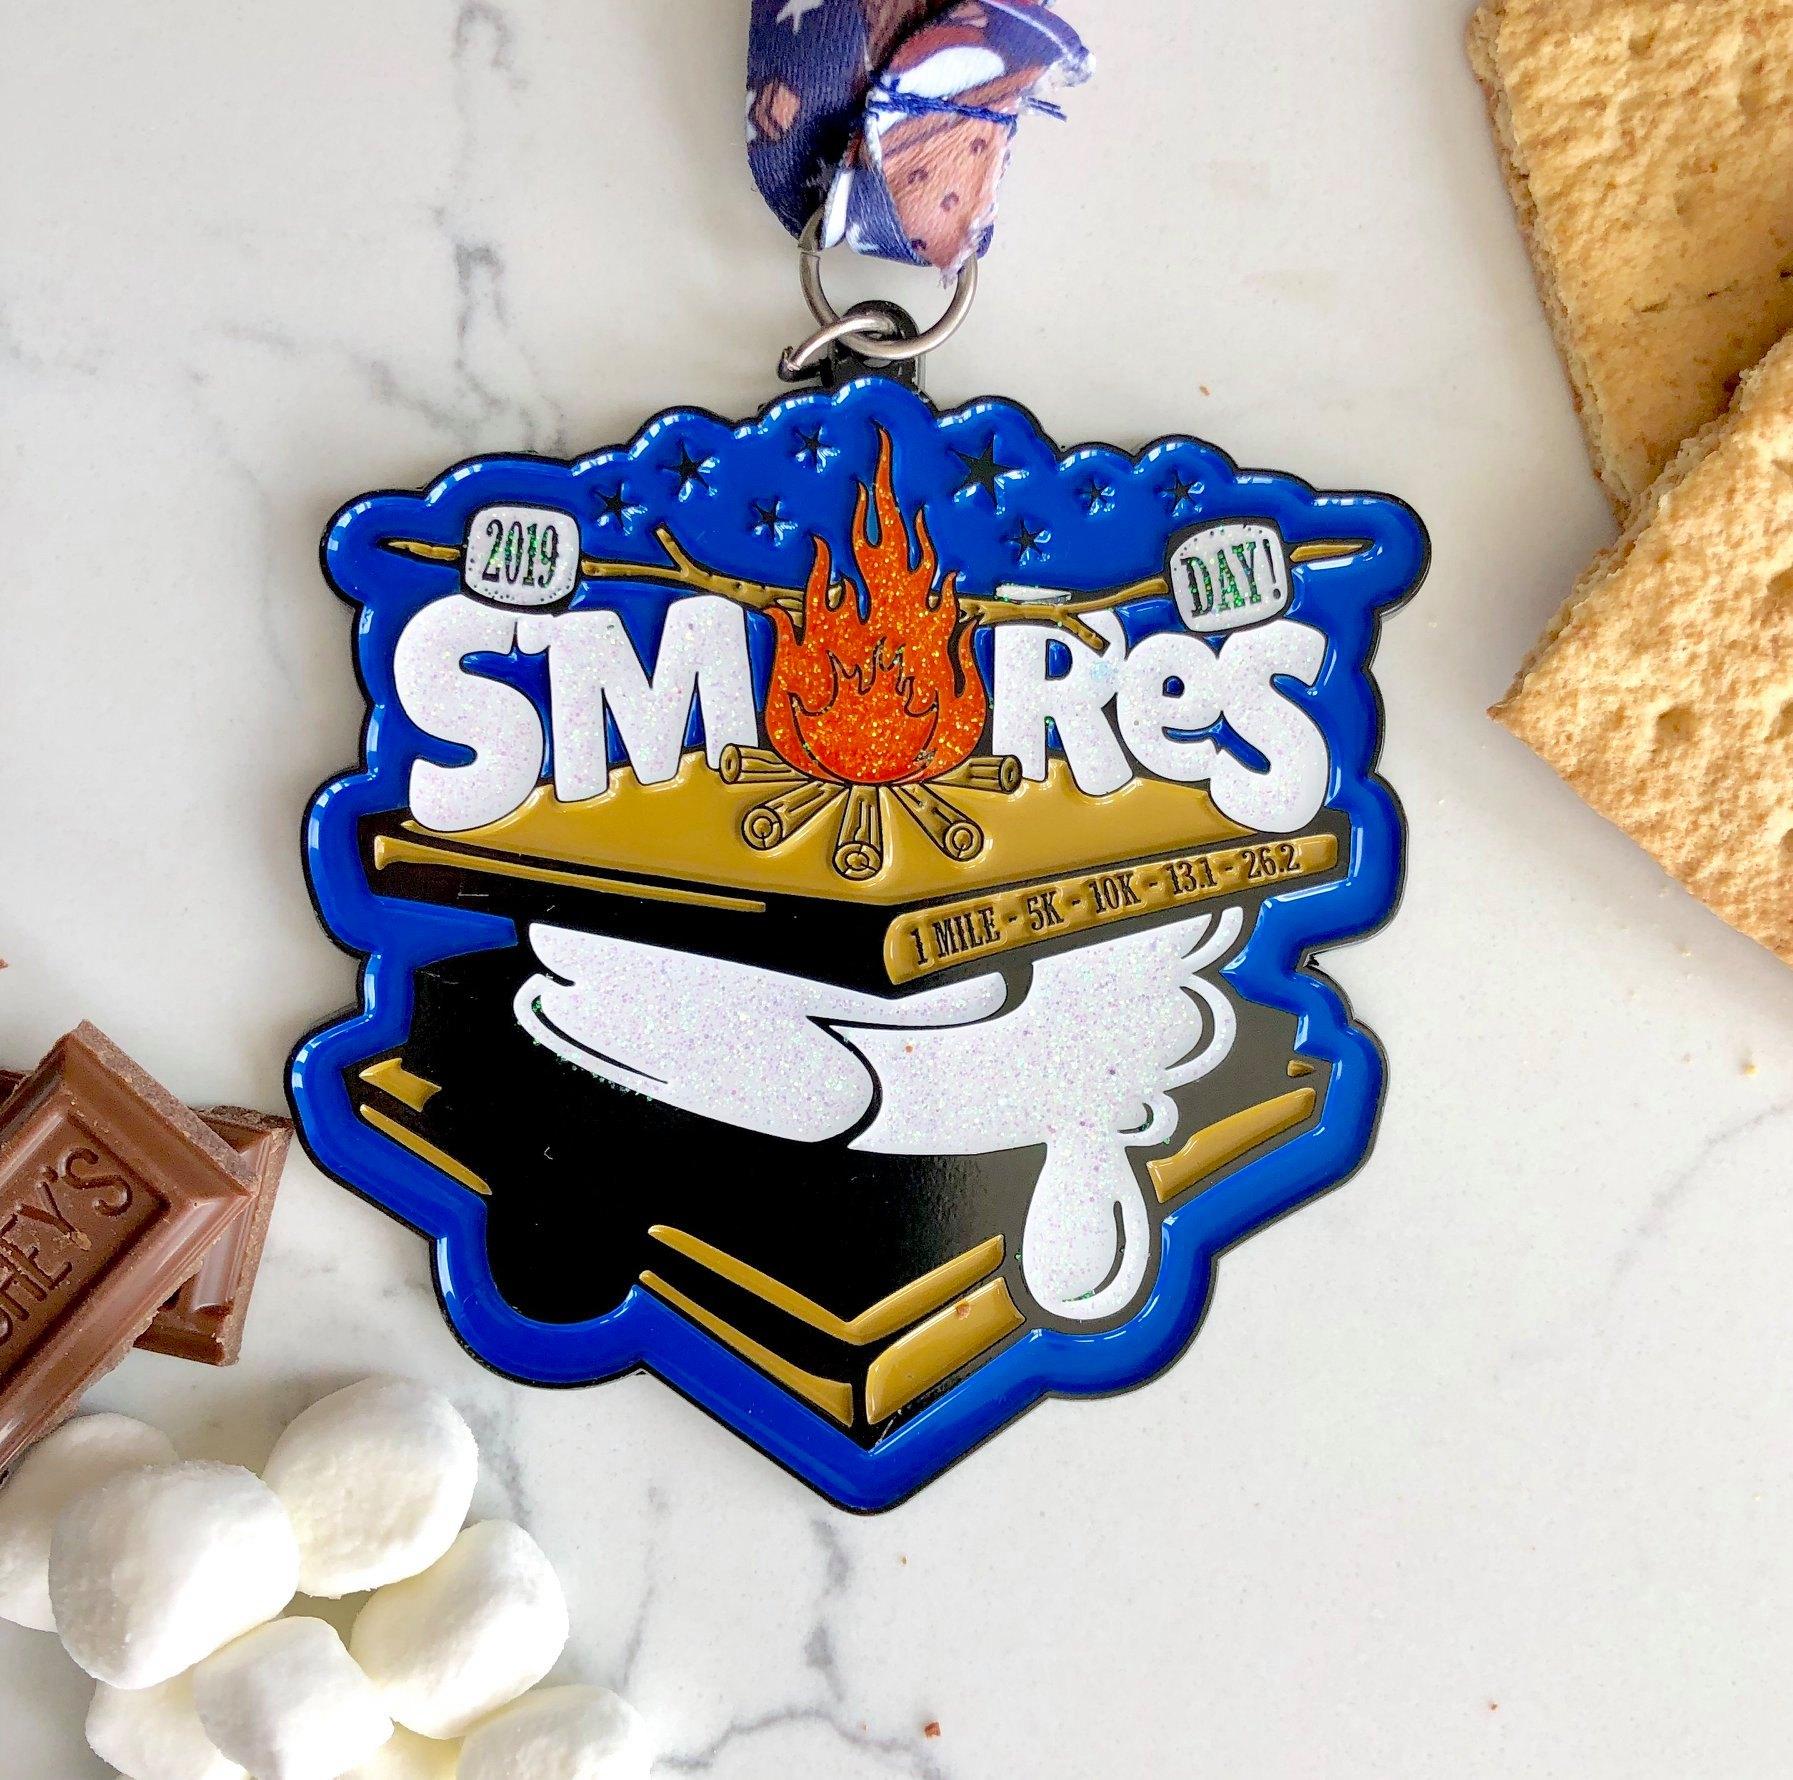 Only $8! S'mores Day 1 Mile, 5K, 10K, 13.1, 26.2 -Springfield